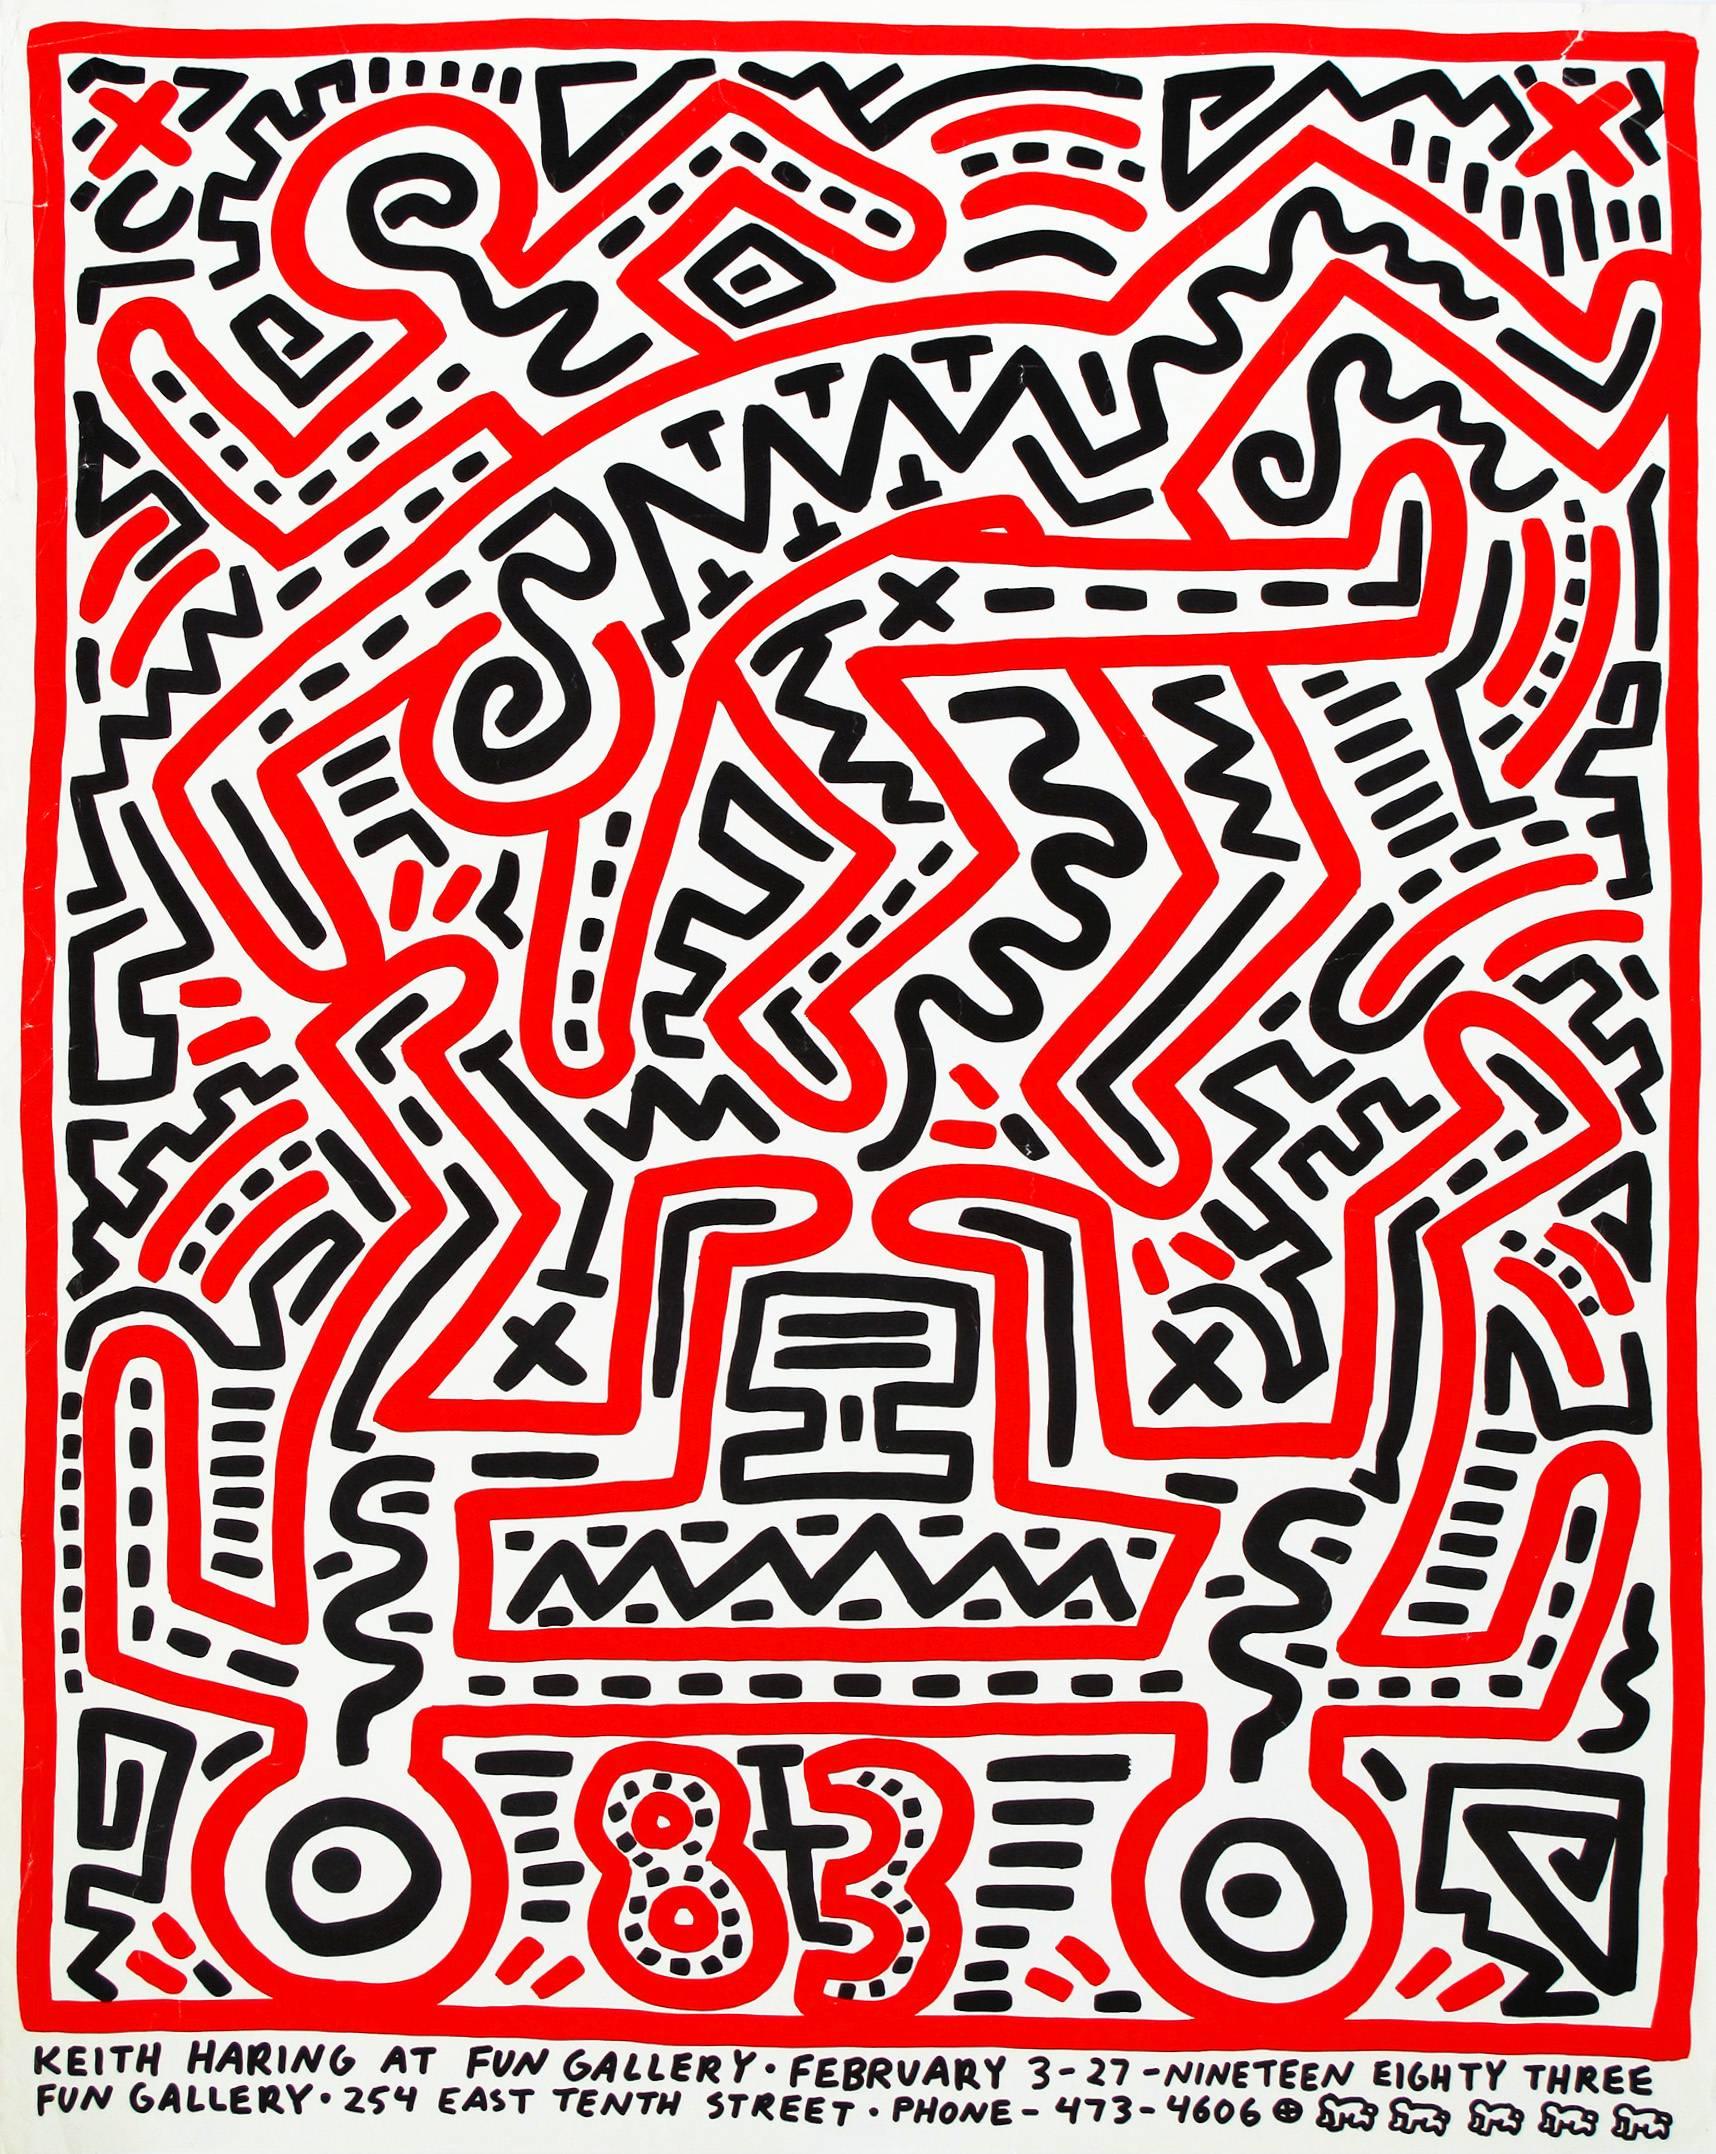 Keith Haring Print - Fun Gallery Exhibition Poster